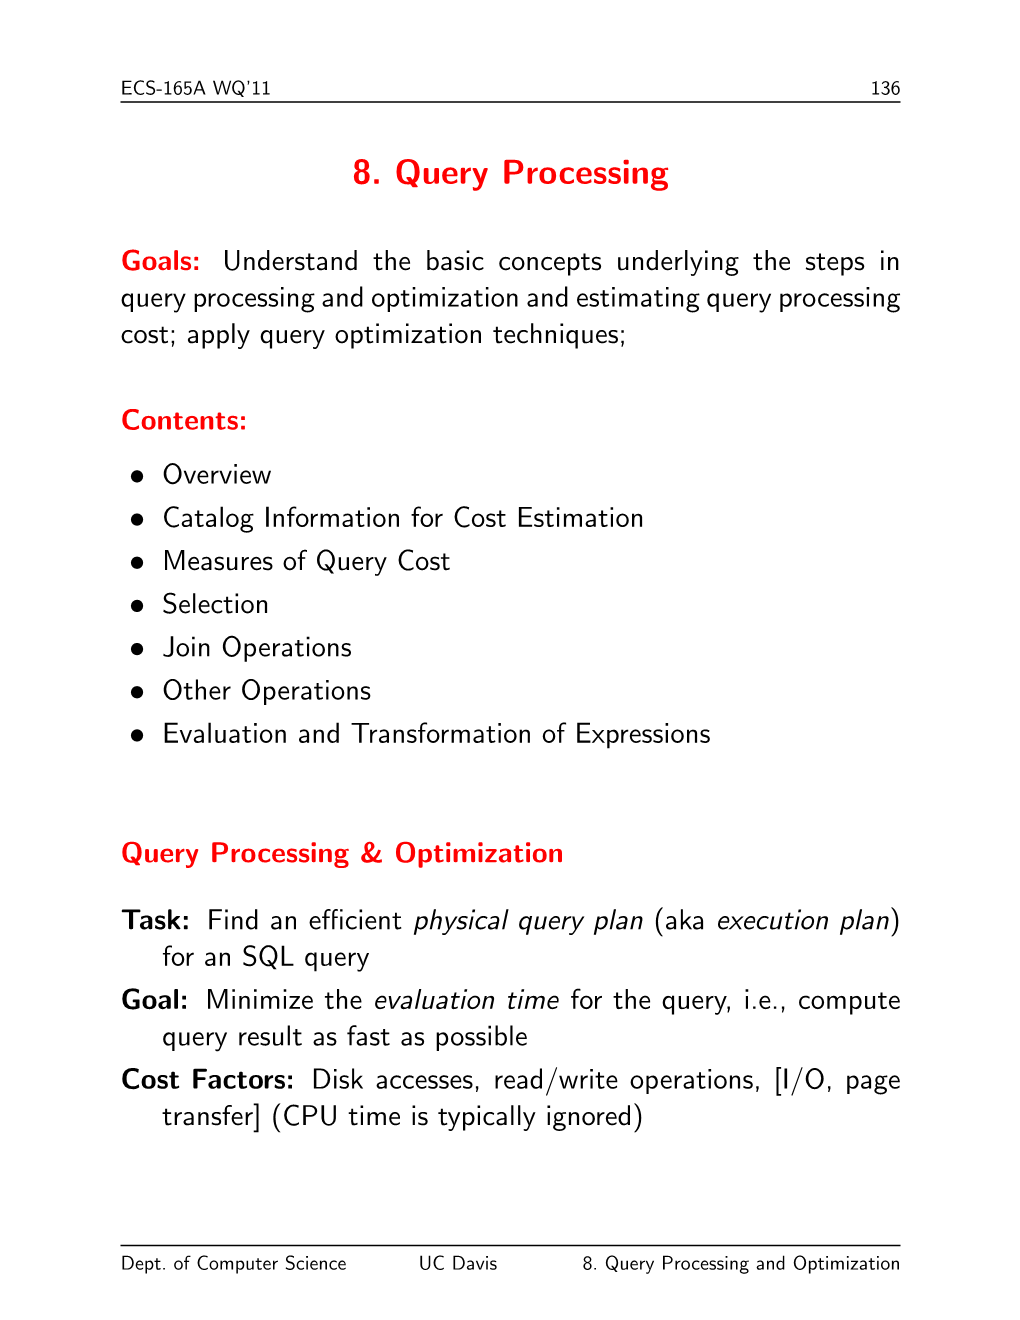 8. Query Processing